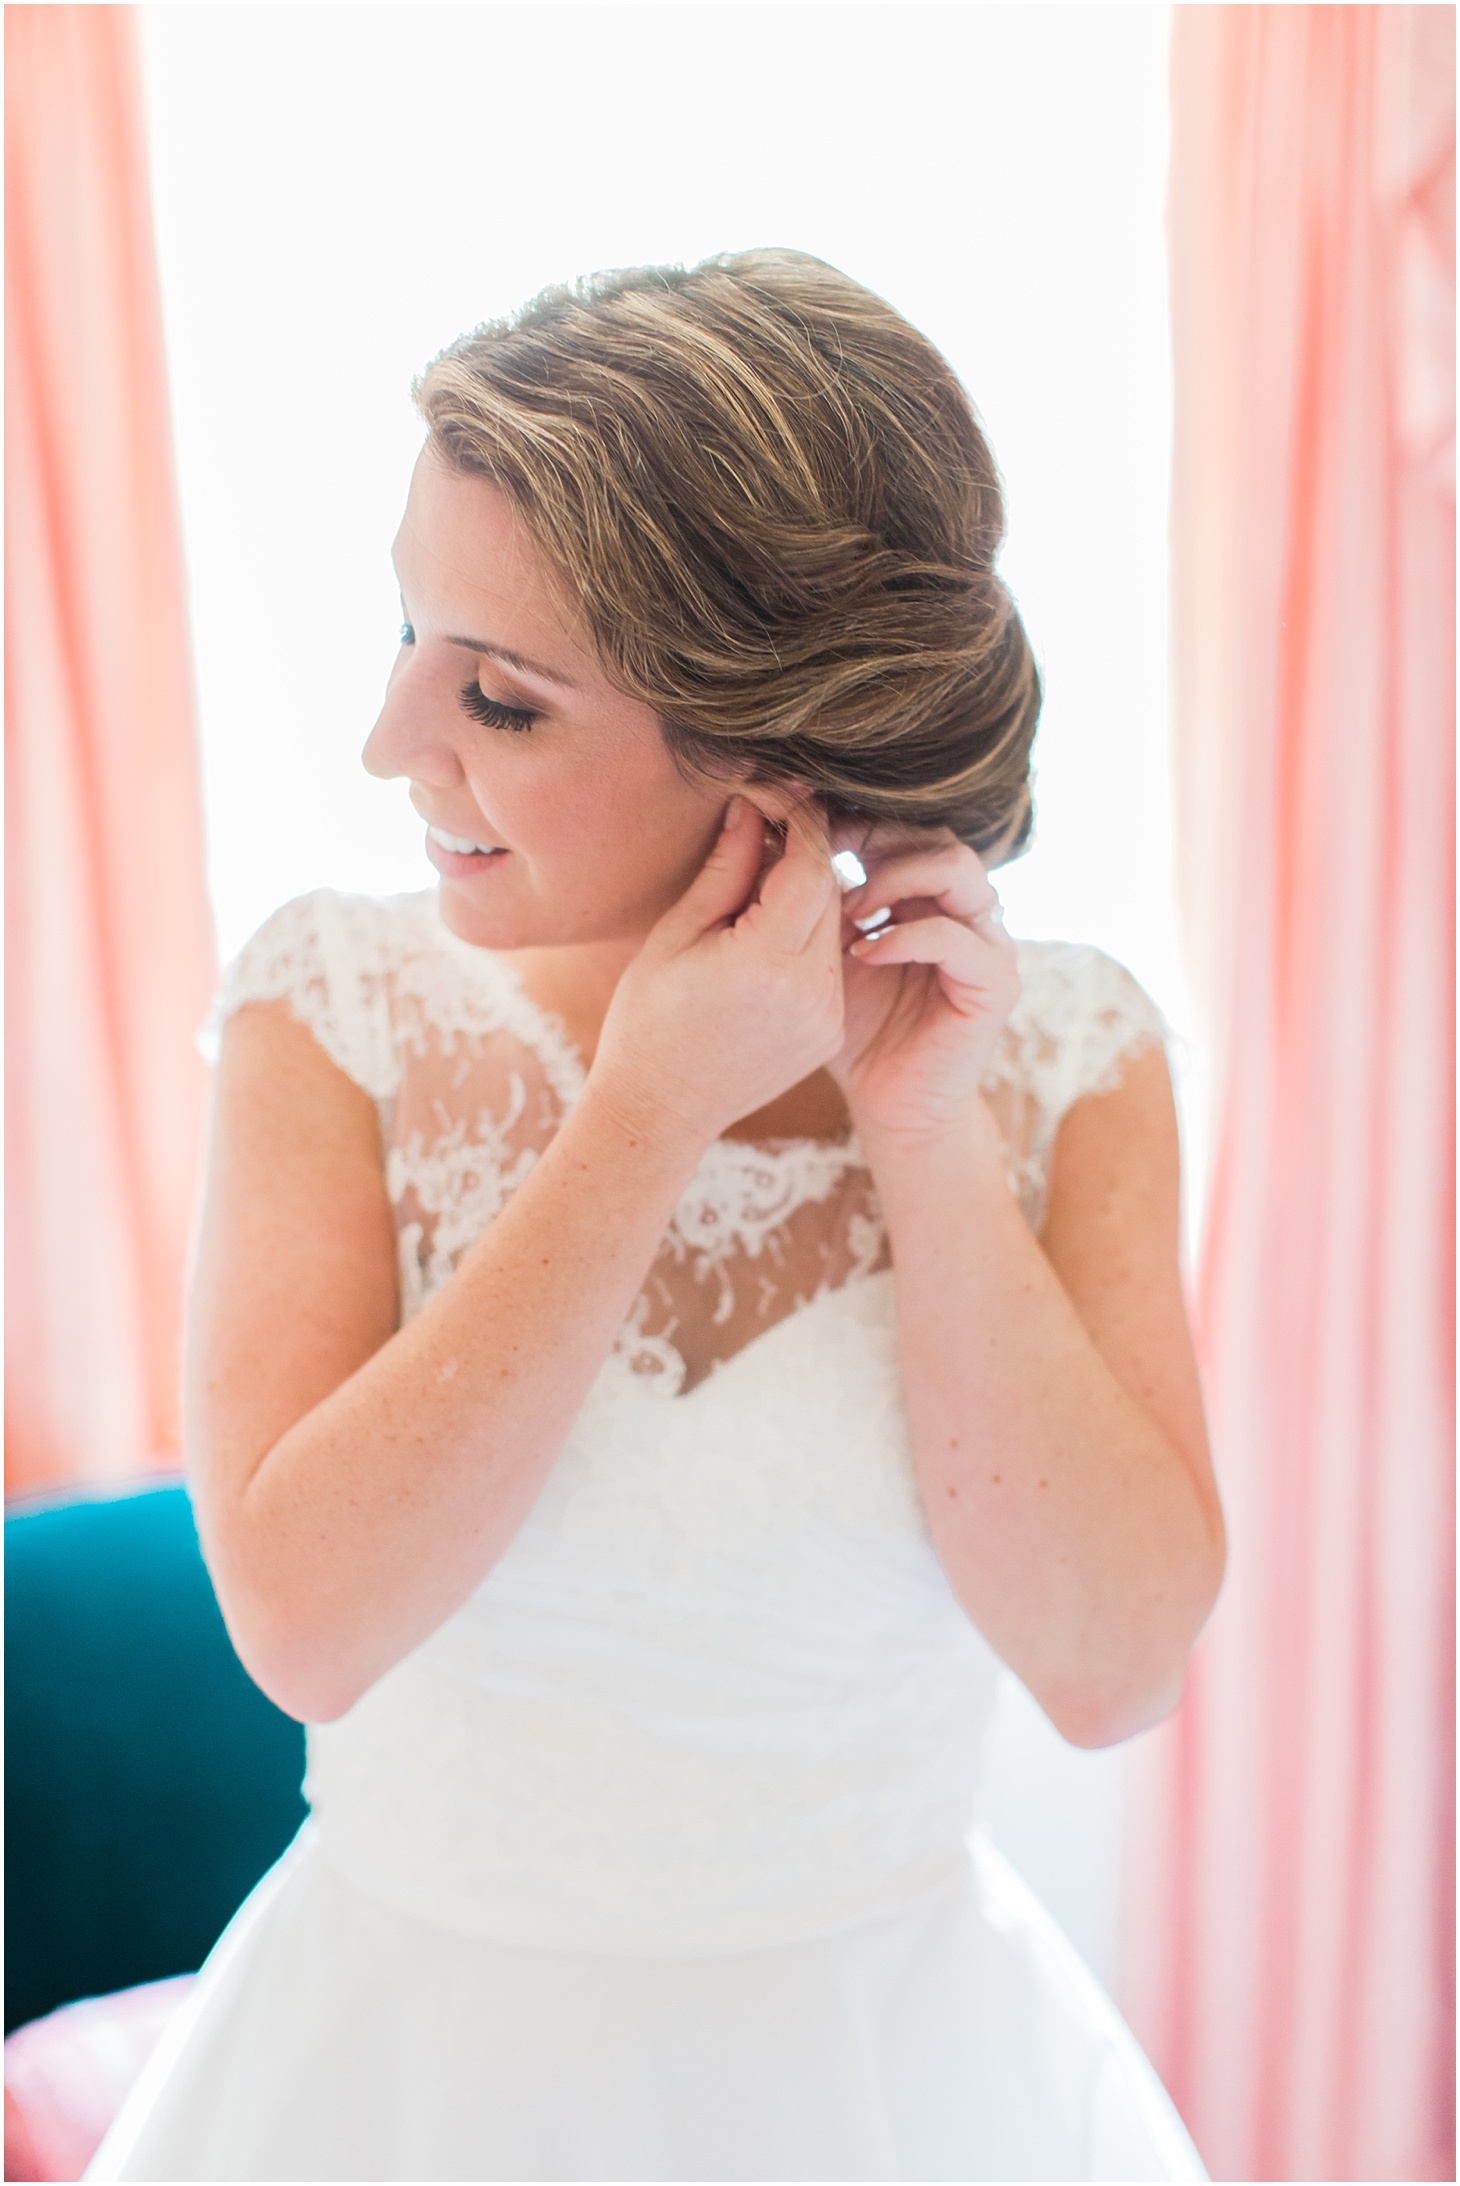 Bride Getting Ready in Custom Lace Bolero and Gown by Pronovias Wedding Gown | Blush and Black Tie Wedding in Williamsburg, VA | Sarah Bradshaw Photography